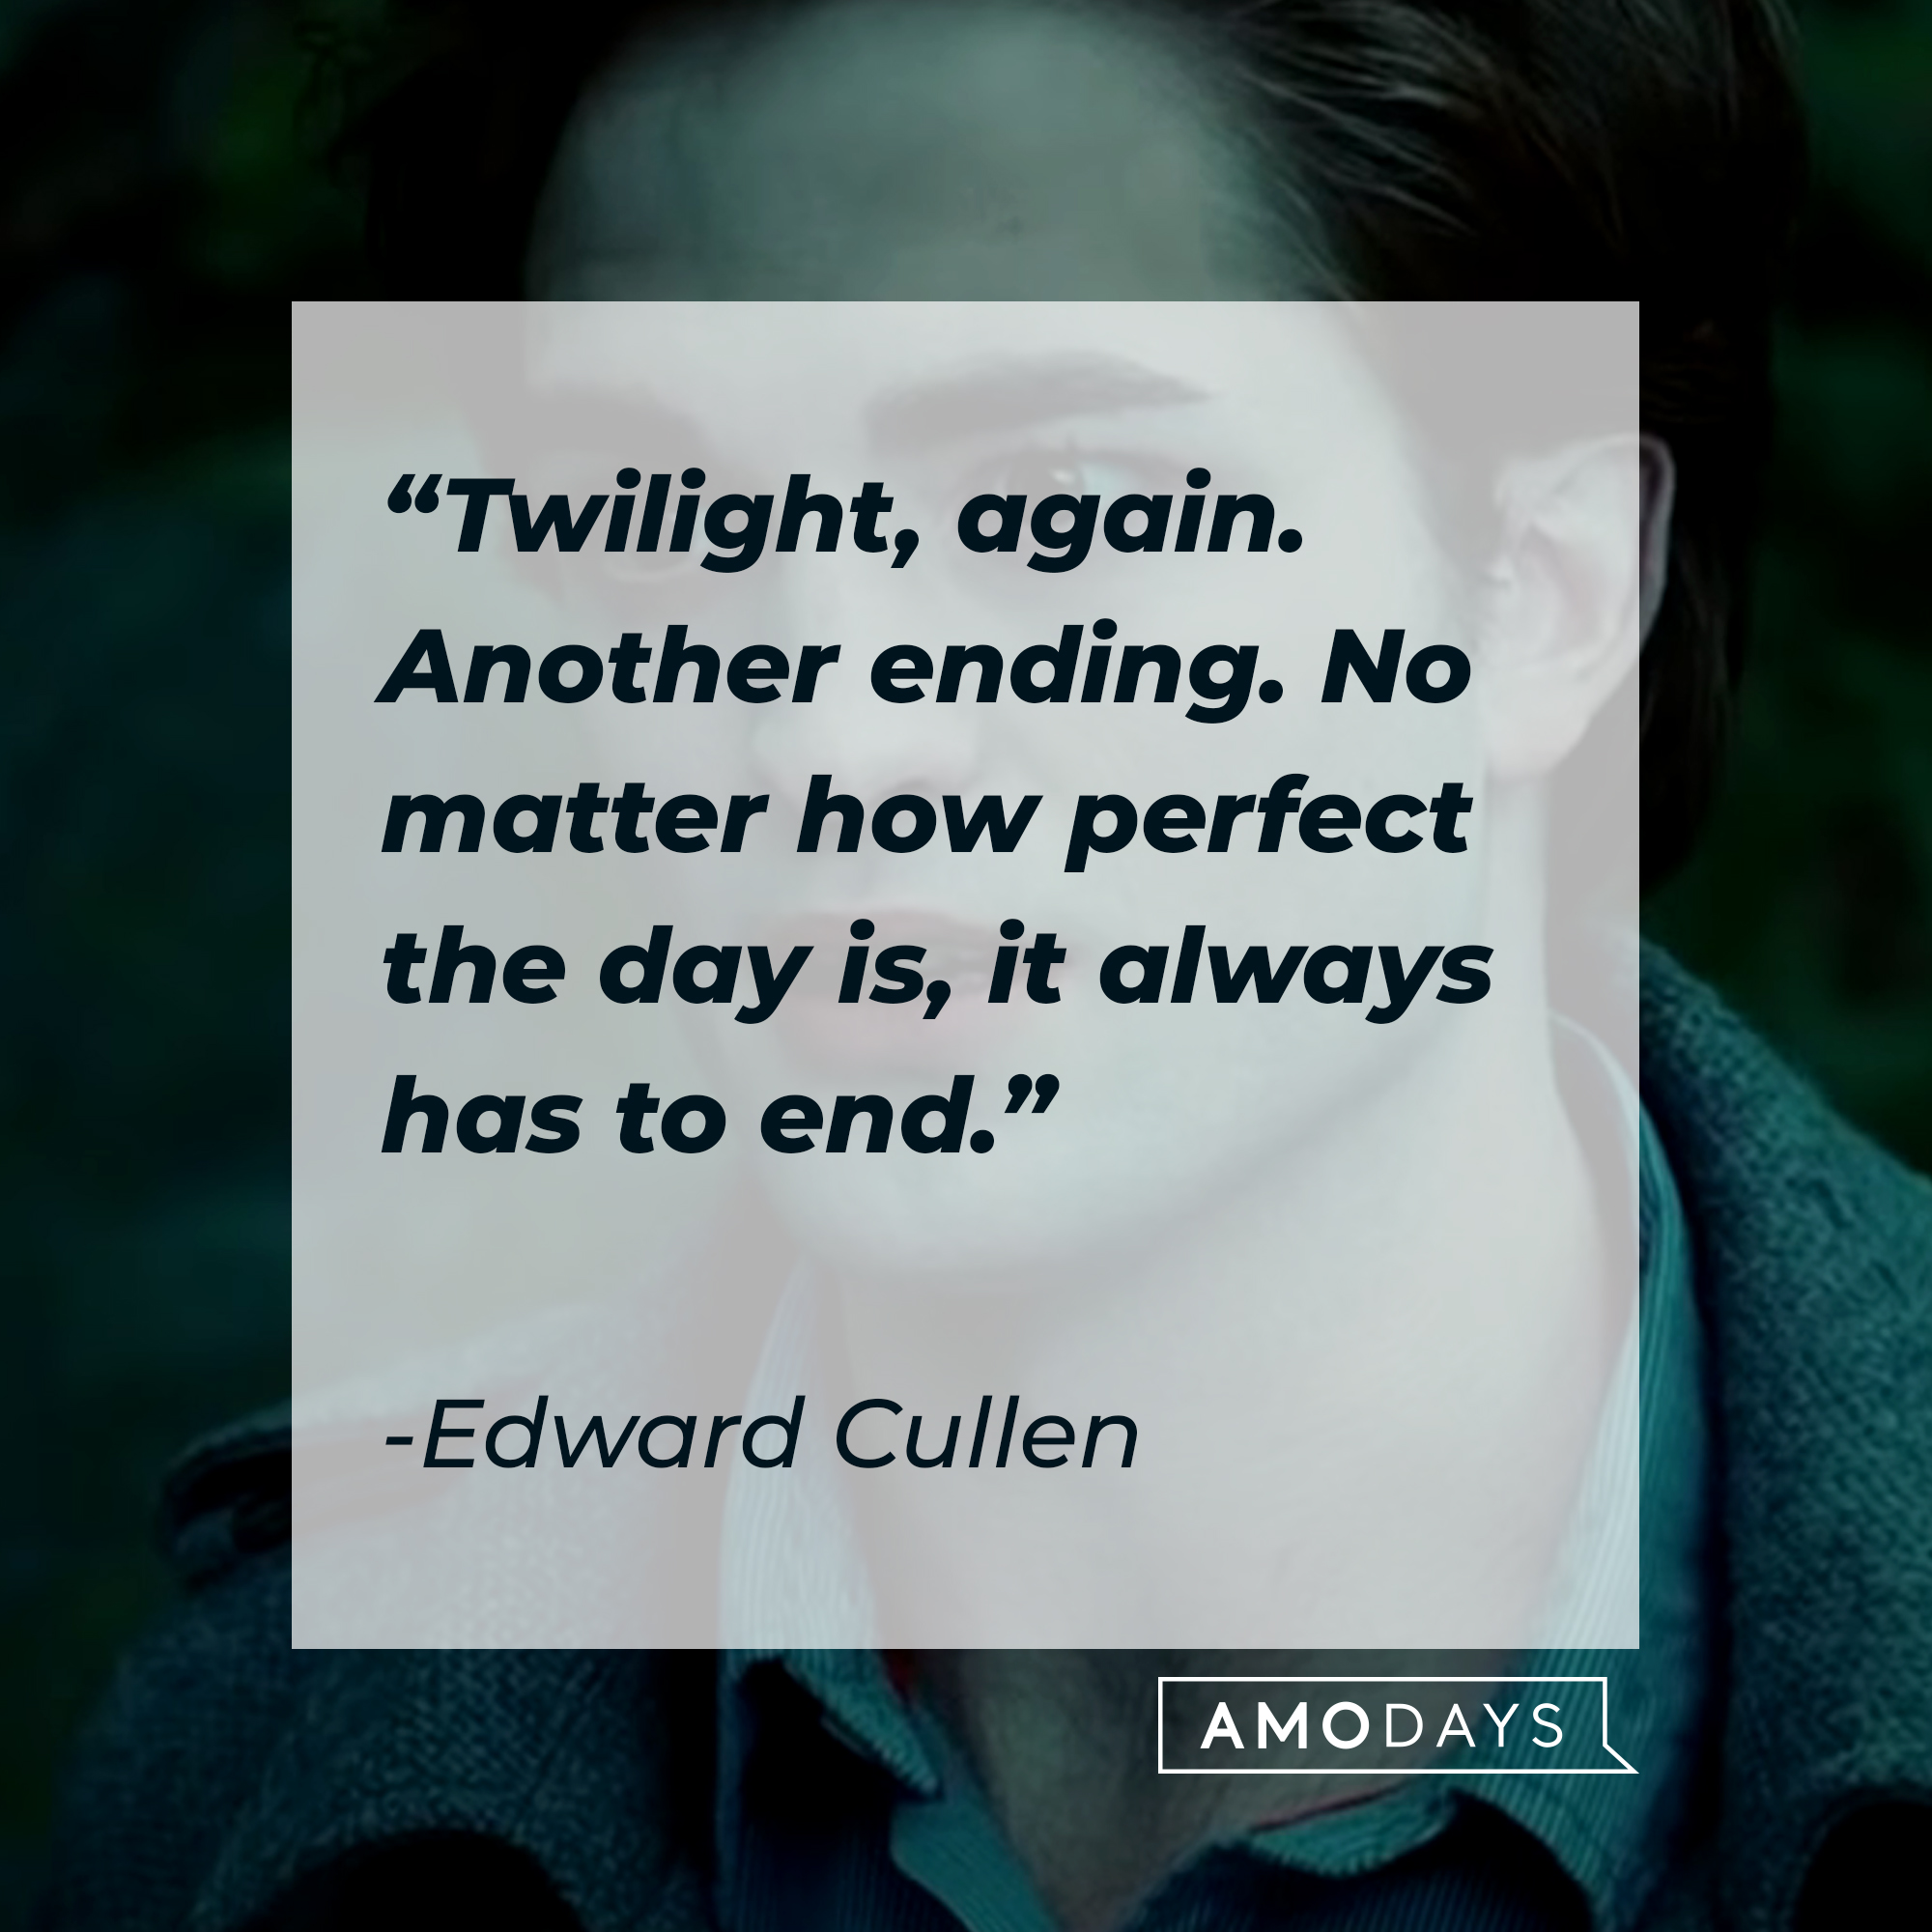 Edward Cullen's quote: “Twilight, again. Another ending. No matter how perfect the day is, it always has to end.” | Source: facebook.com/twilight